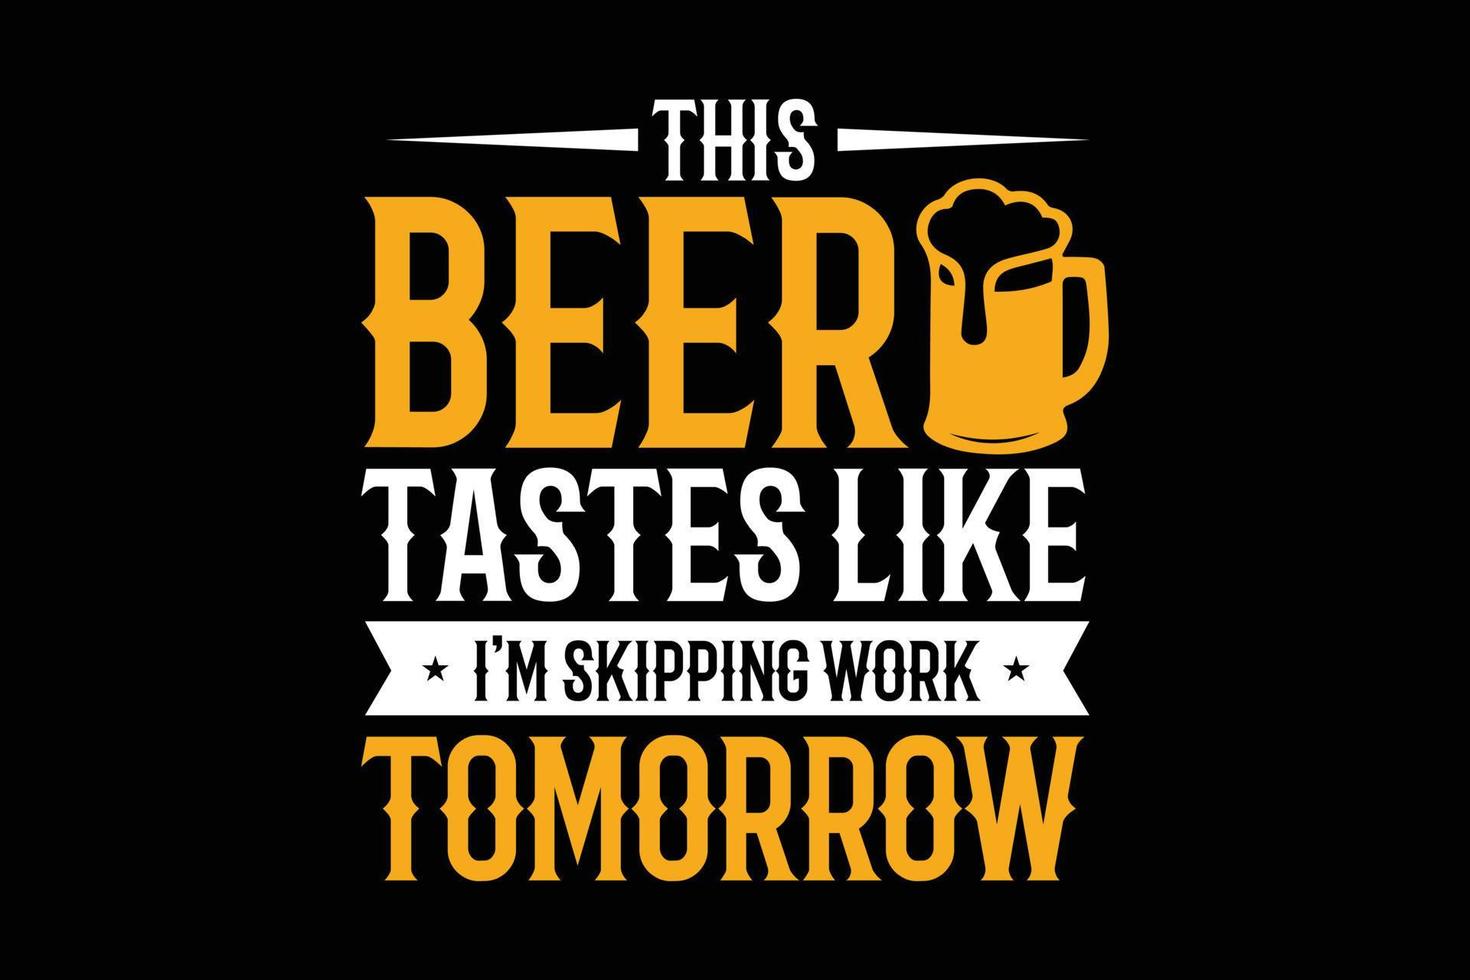 This beer tastes like i am skipping work tomorrow typography t-shirt design. vector